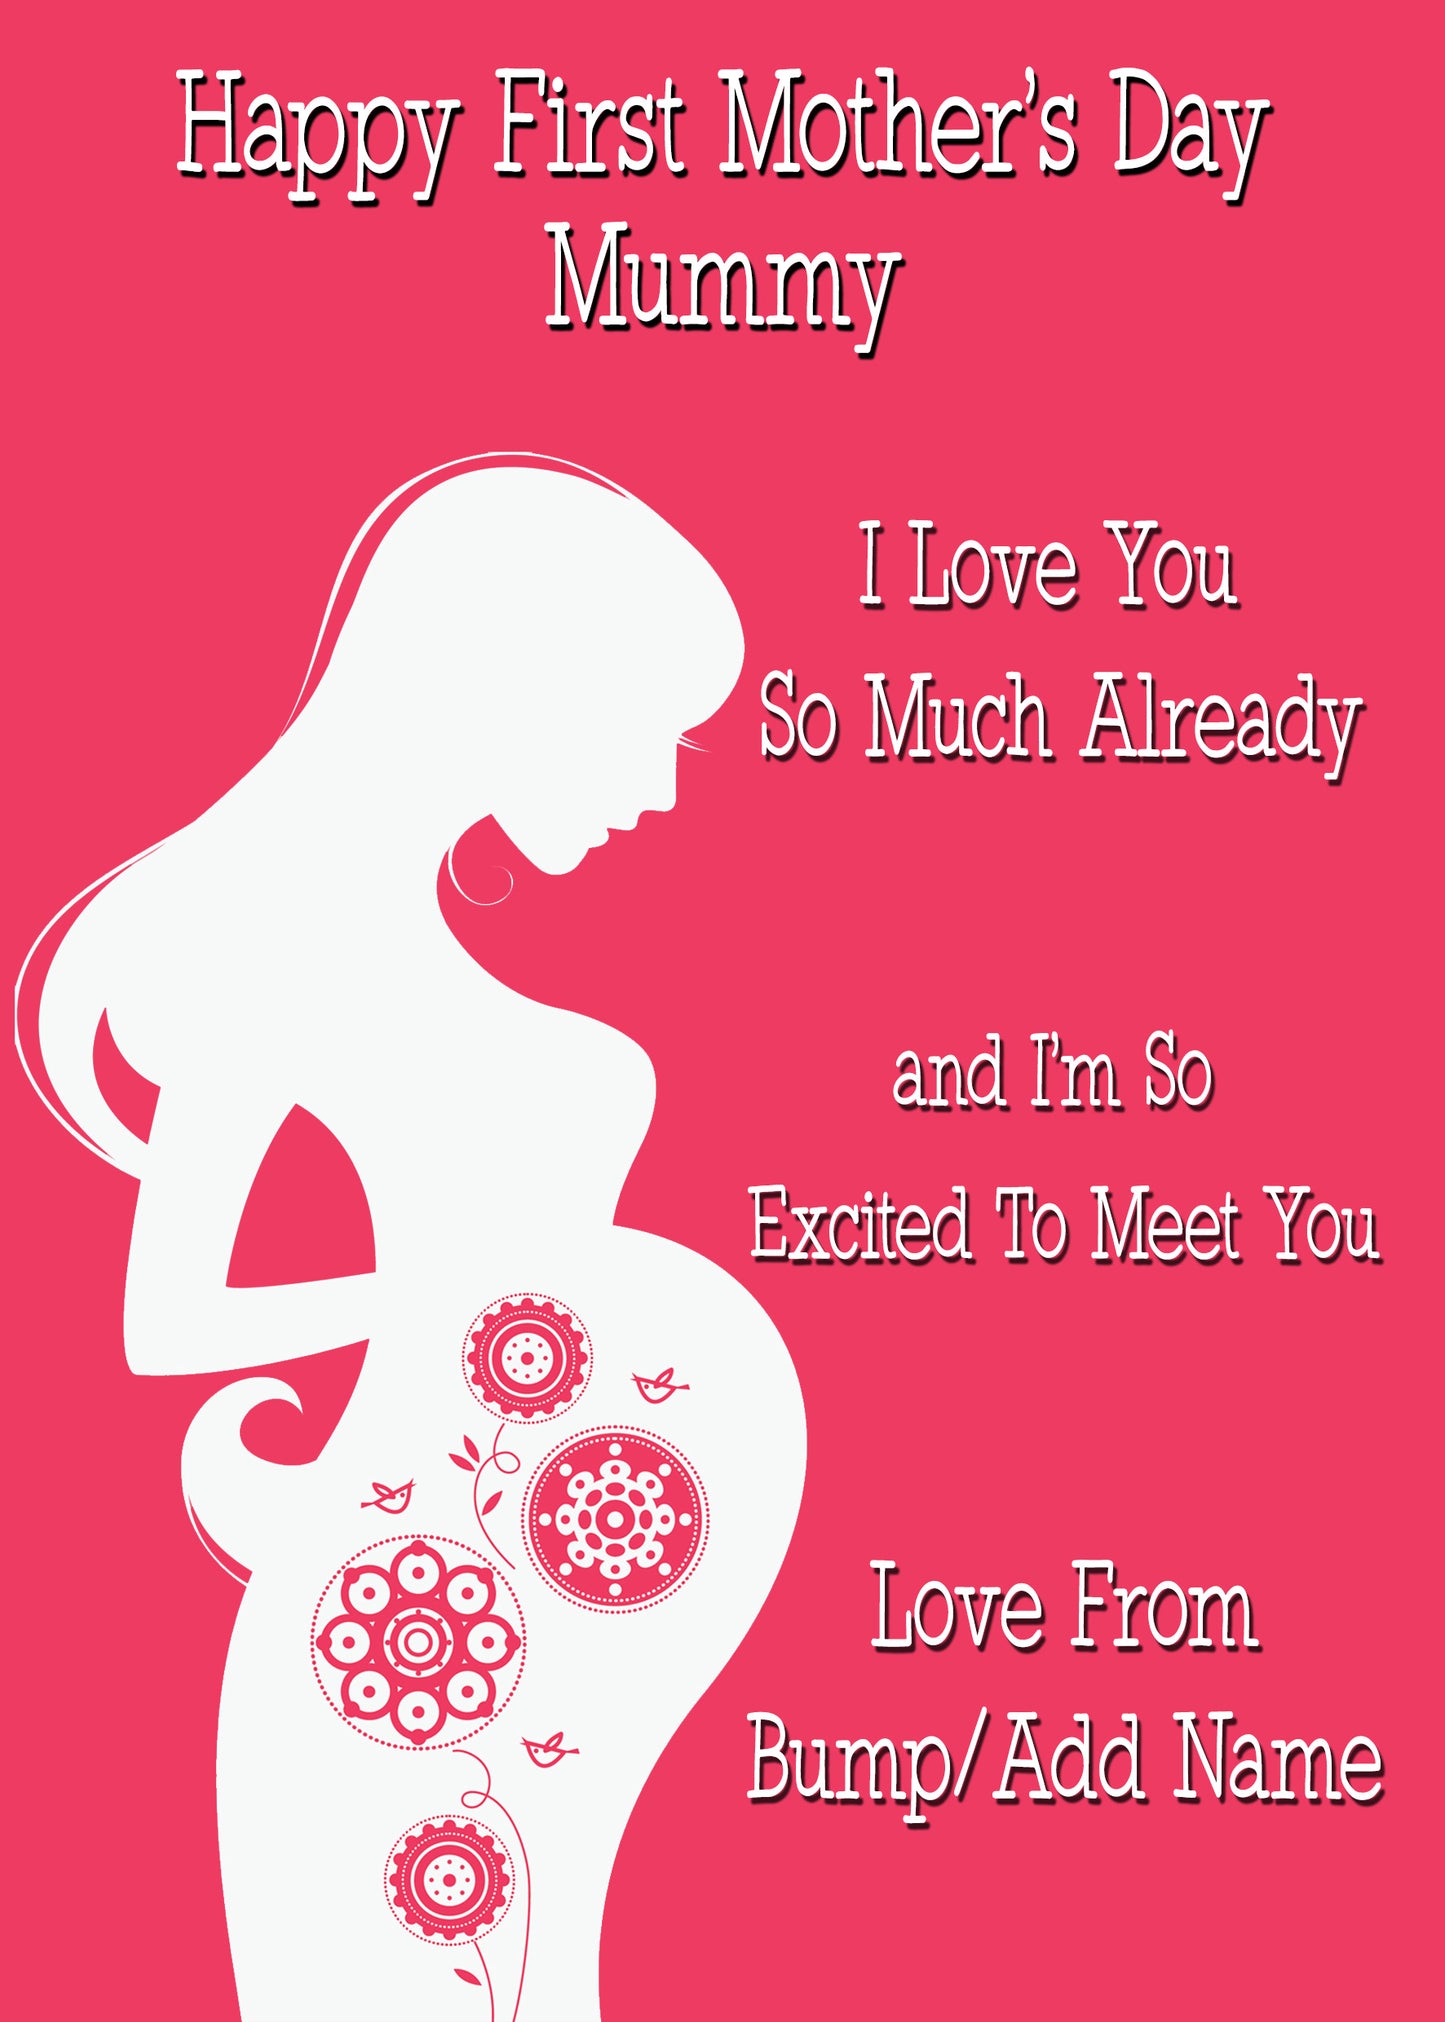 Happy First Mother's Day Pink Card